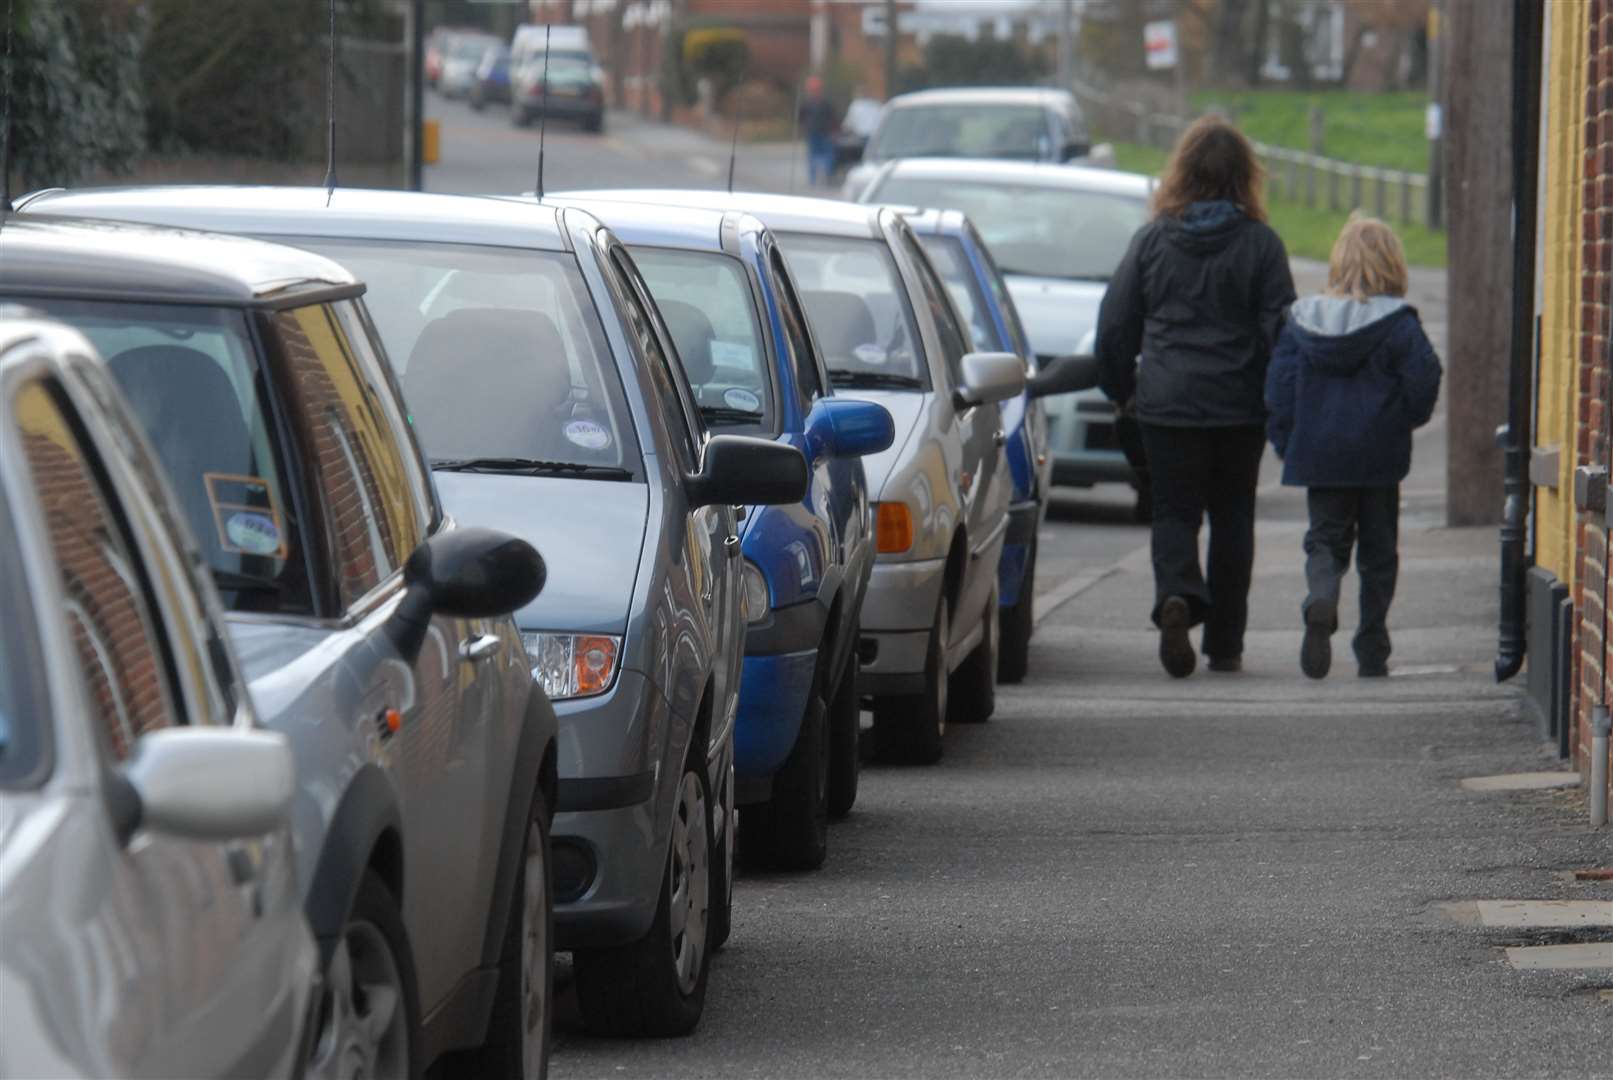 Research suggests cars are parked for, on average 23, hours a day